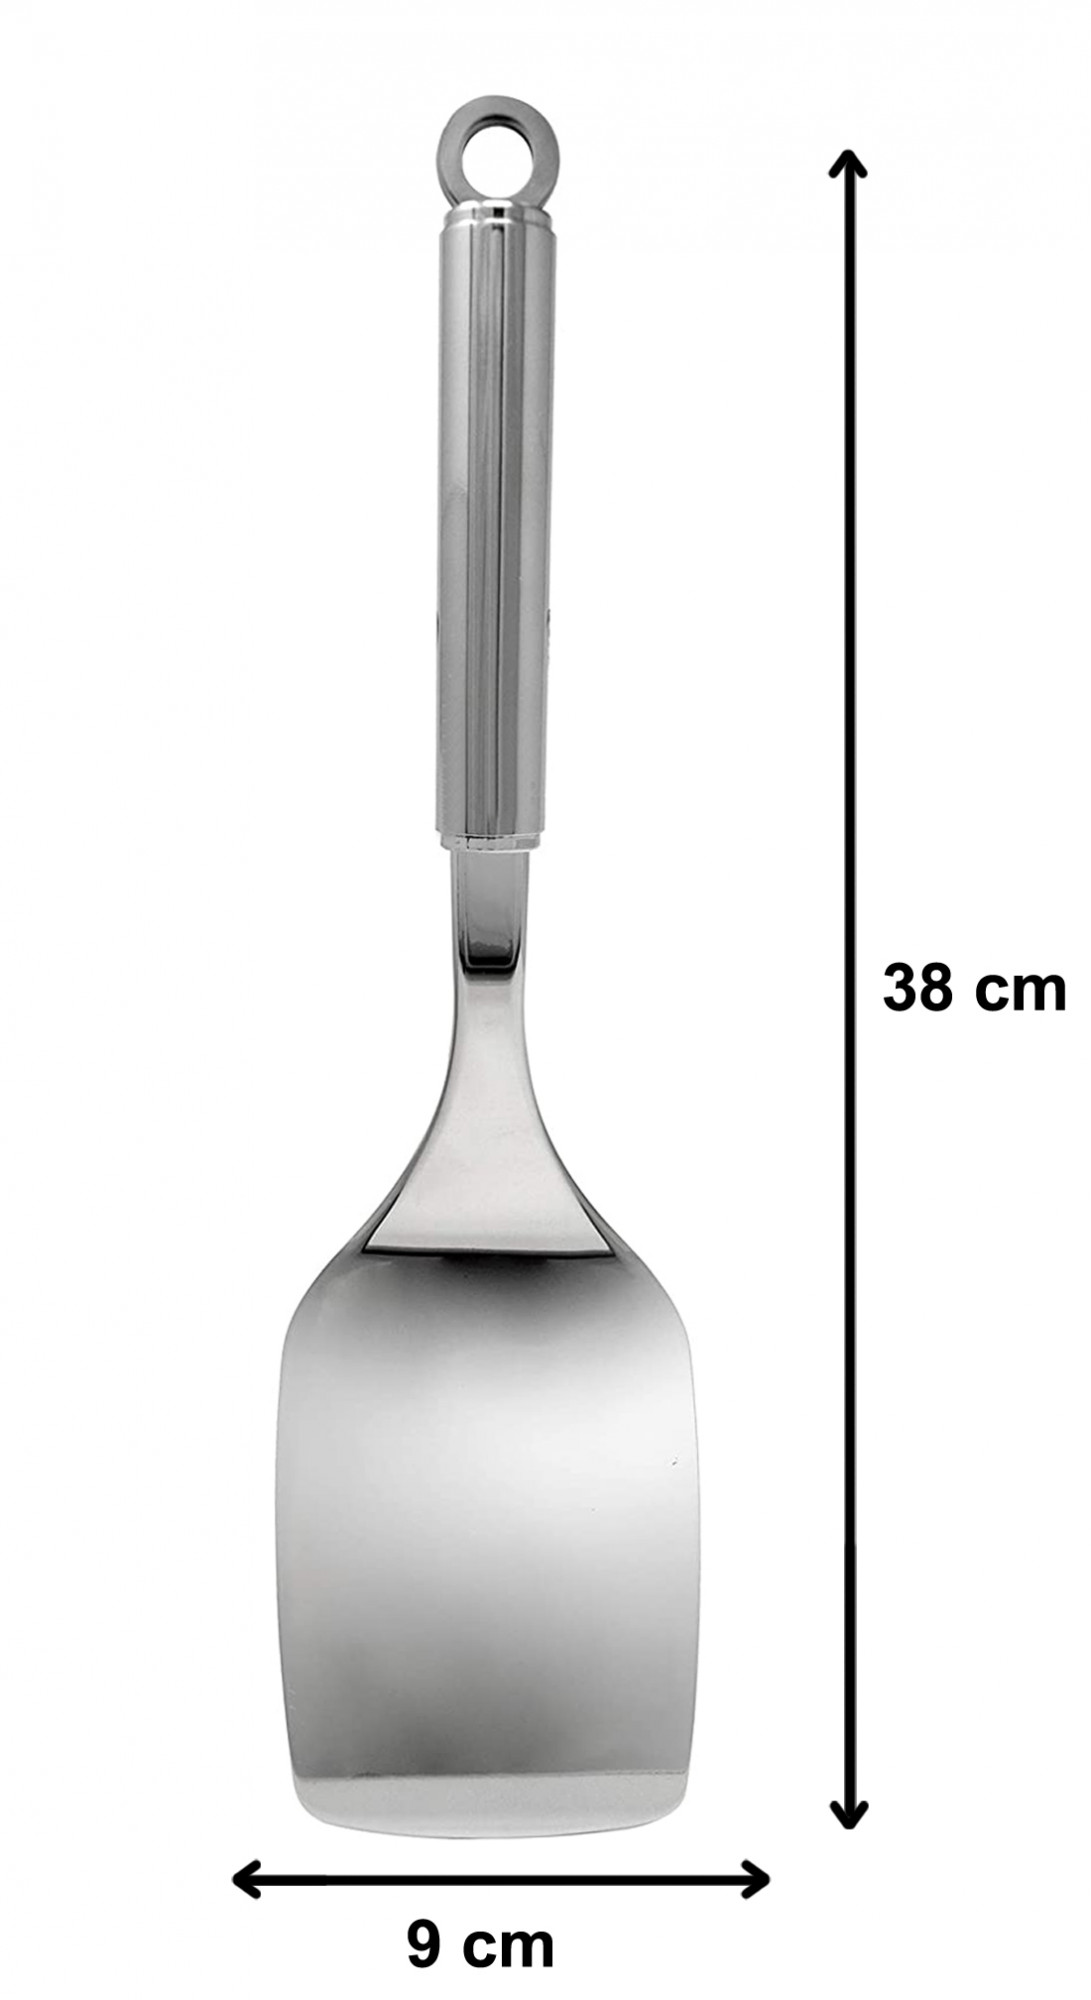 Kuber Industries Stainless Steel Kitchen Utensil Set of 2 (Spatula & Solid Turner) Cooking Utensils - Nonstick Kitchen Utensils Cookware Set Best Kitchen Gadgets Kitchen Tool Set Gift (Silver)